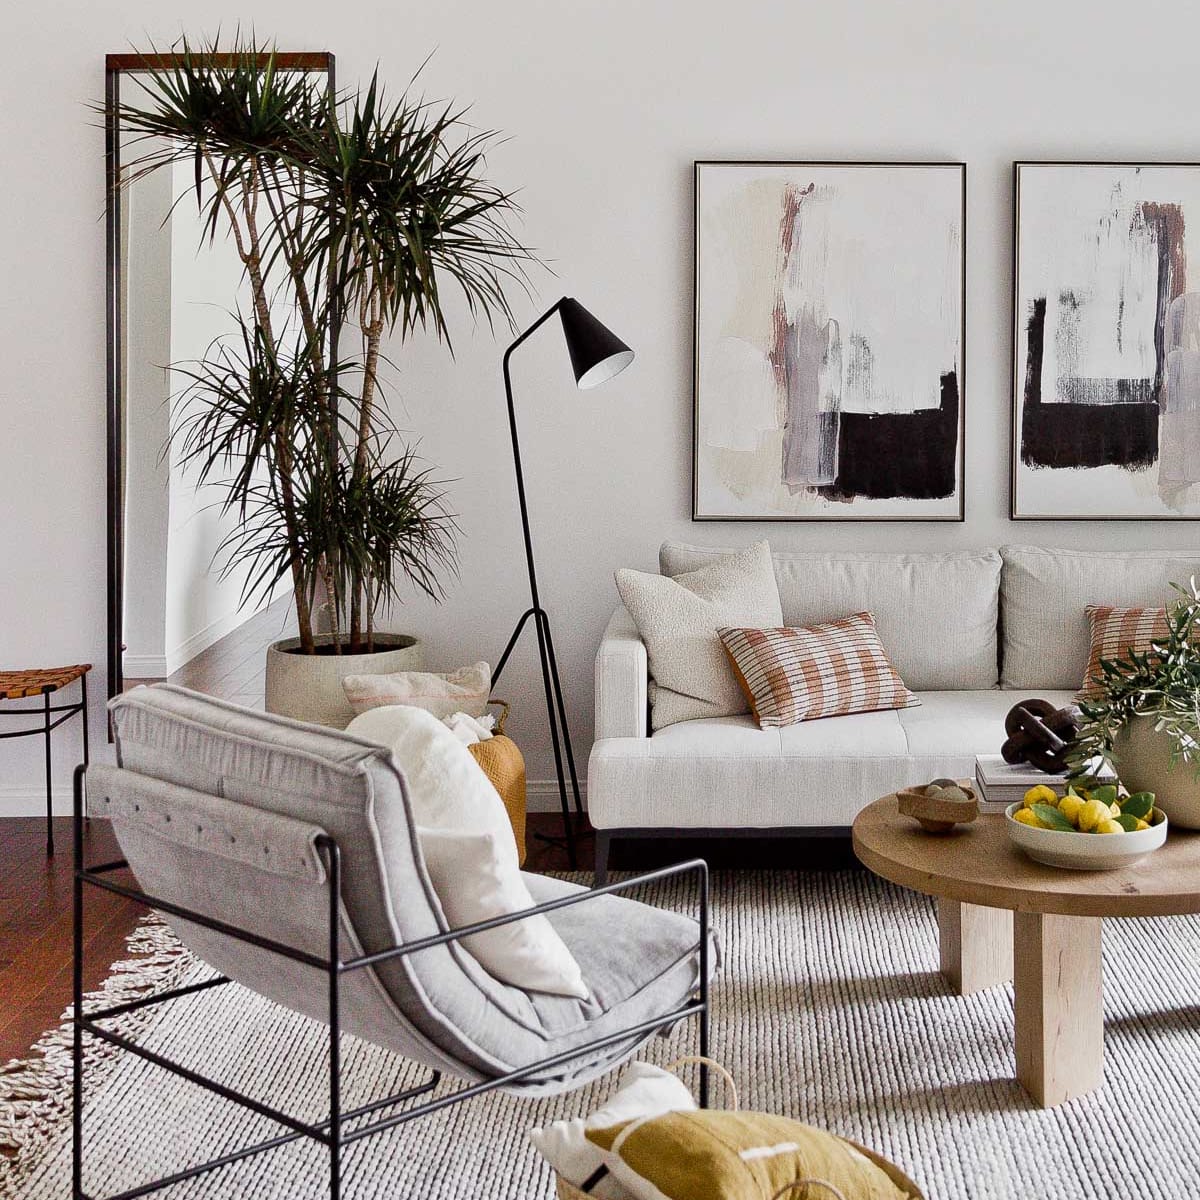 New Furnishings For A Modern Living Room With A Natural, Organic Vibe —  DESIGNED